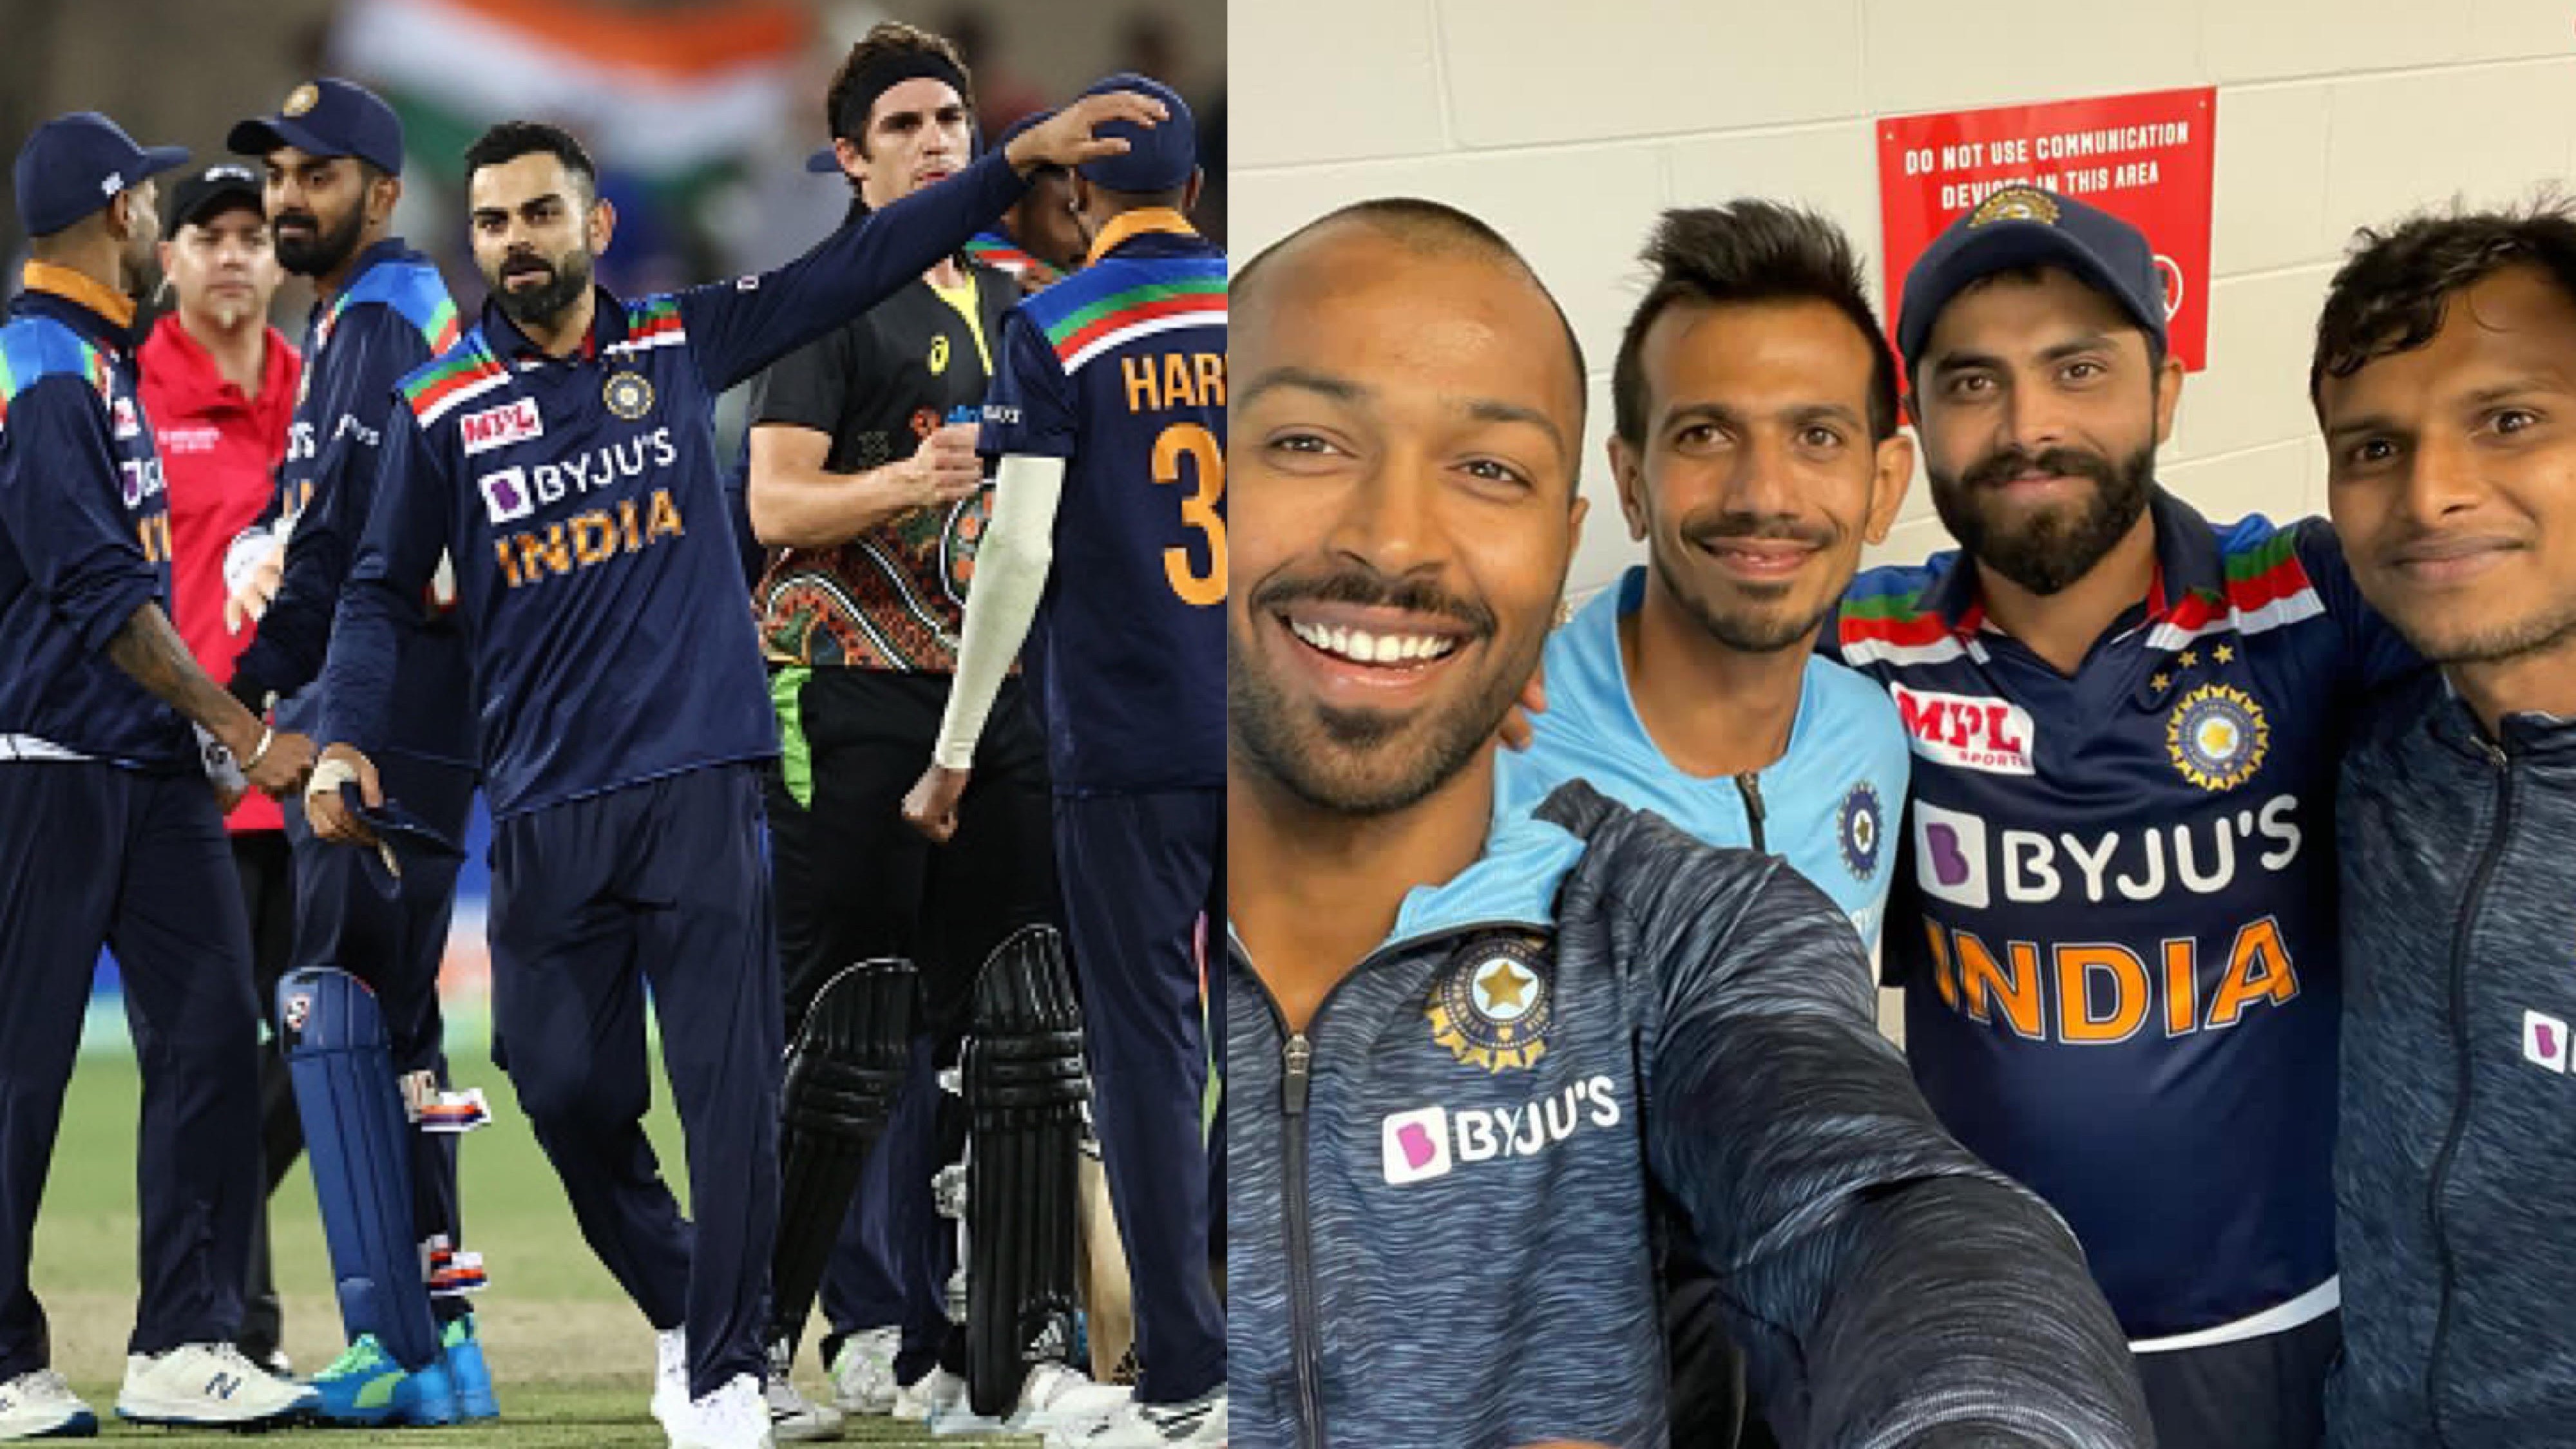 AUS v IND 2020-21: Team India tweets after defeating Australia in 1st T20I